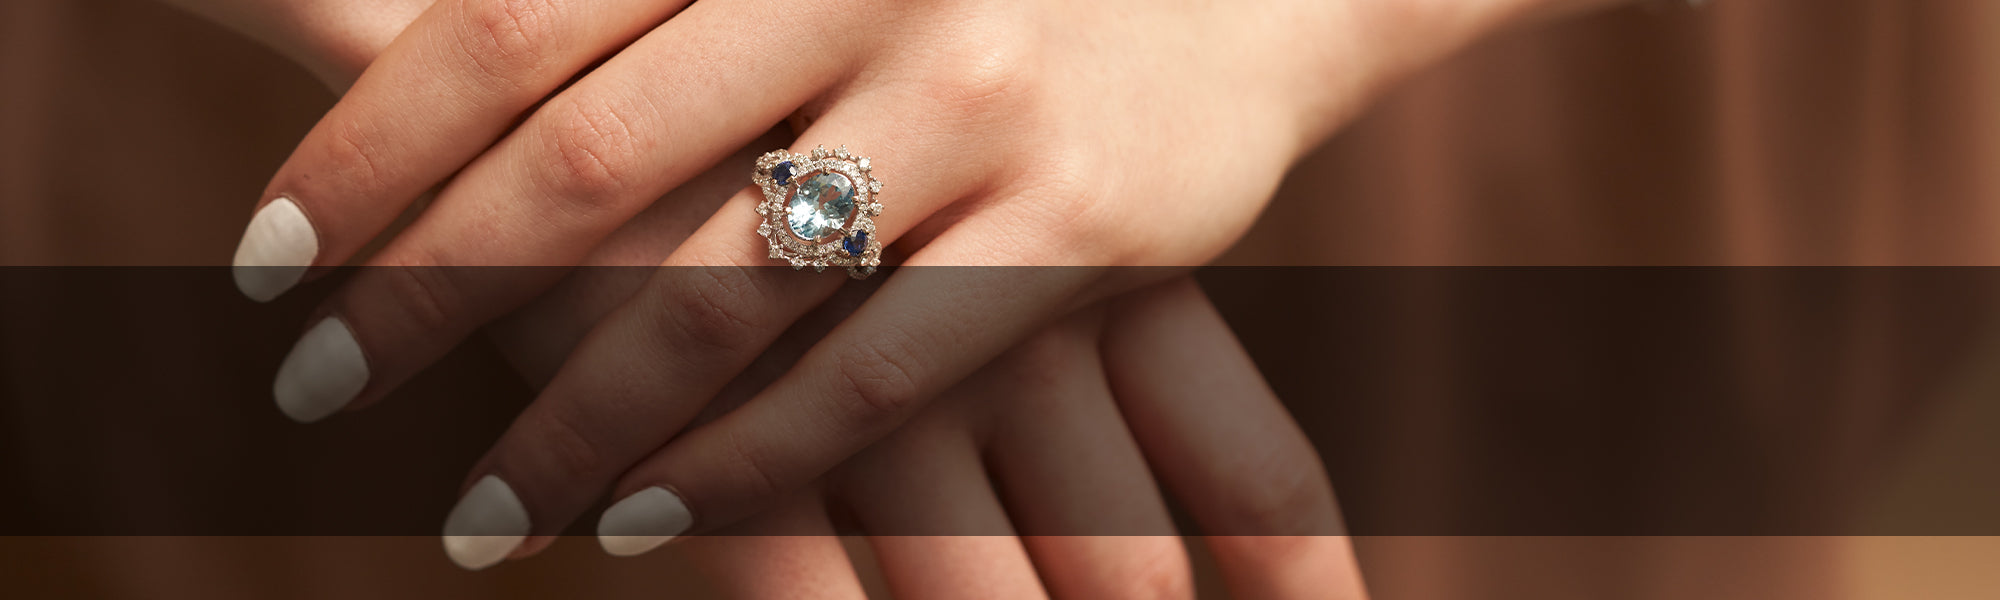 Woman Wearing Aquamarine Ring by Park City Jewelers